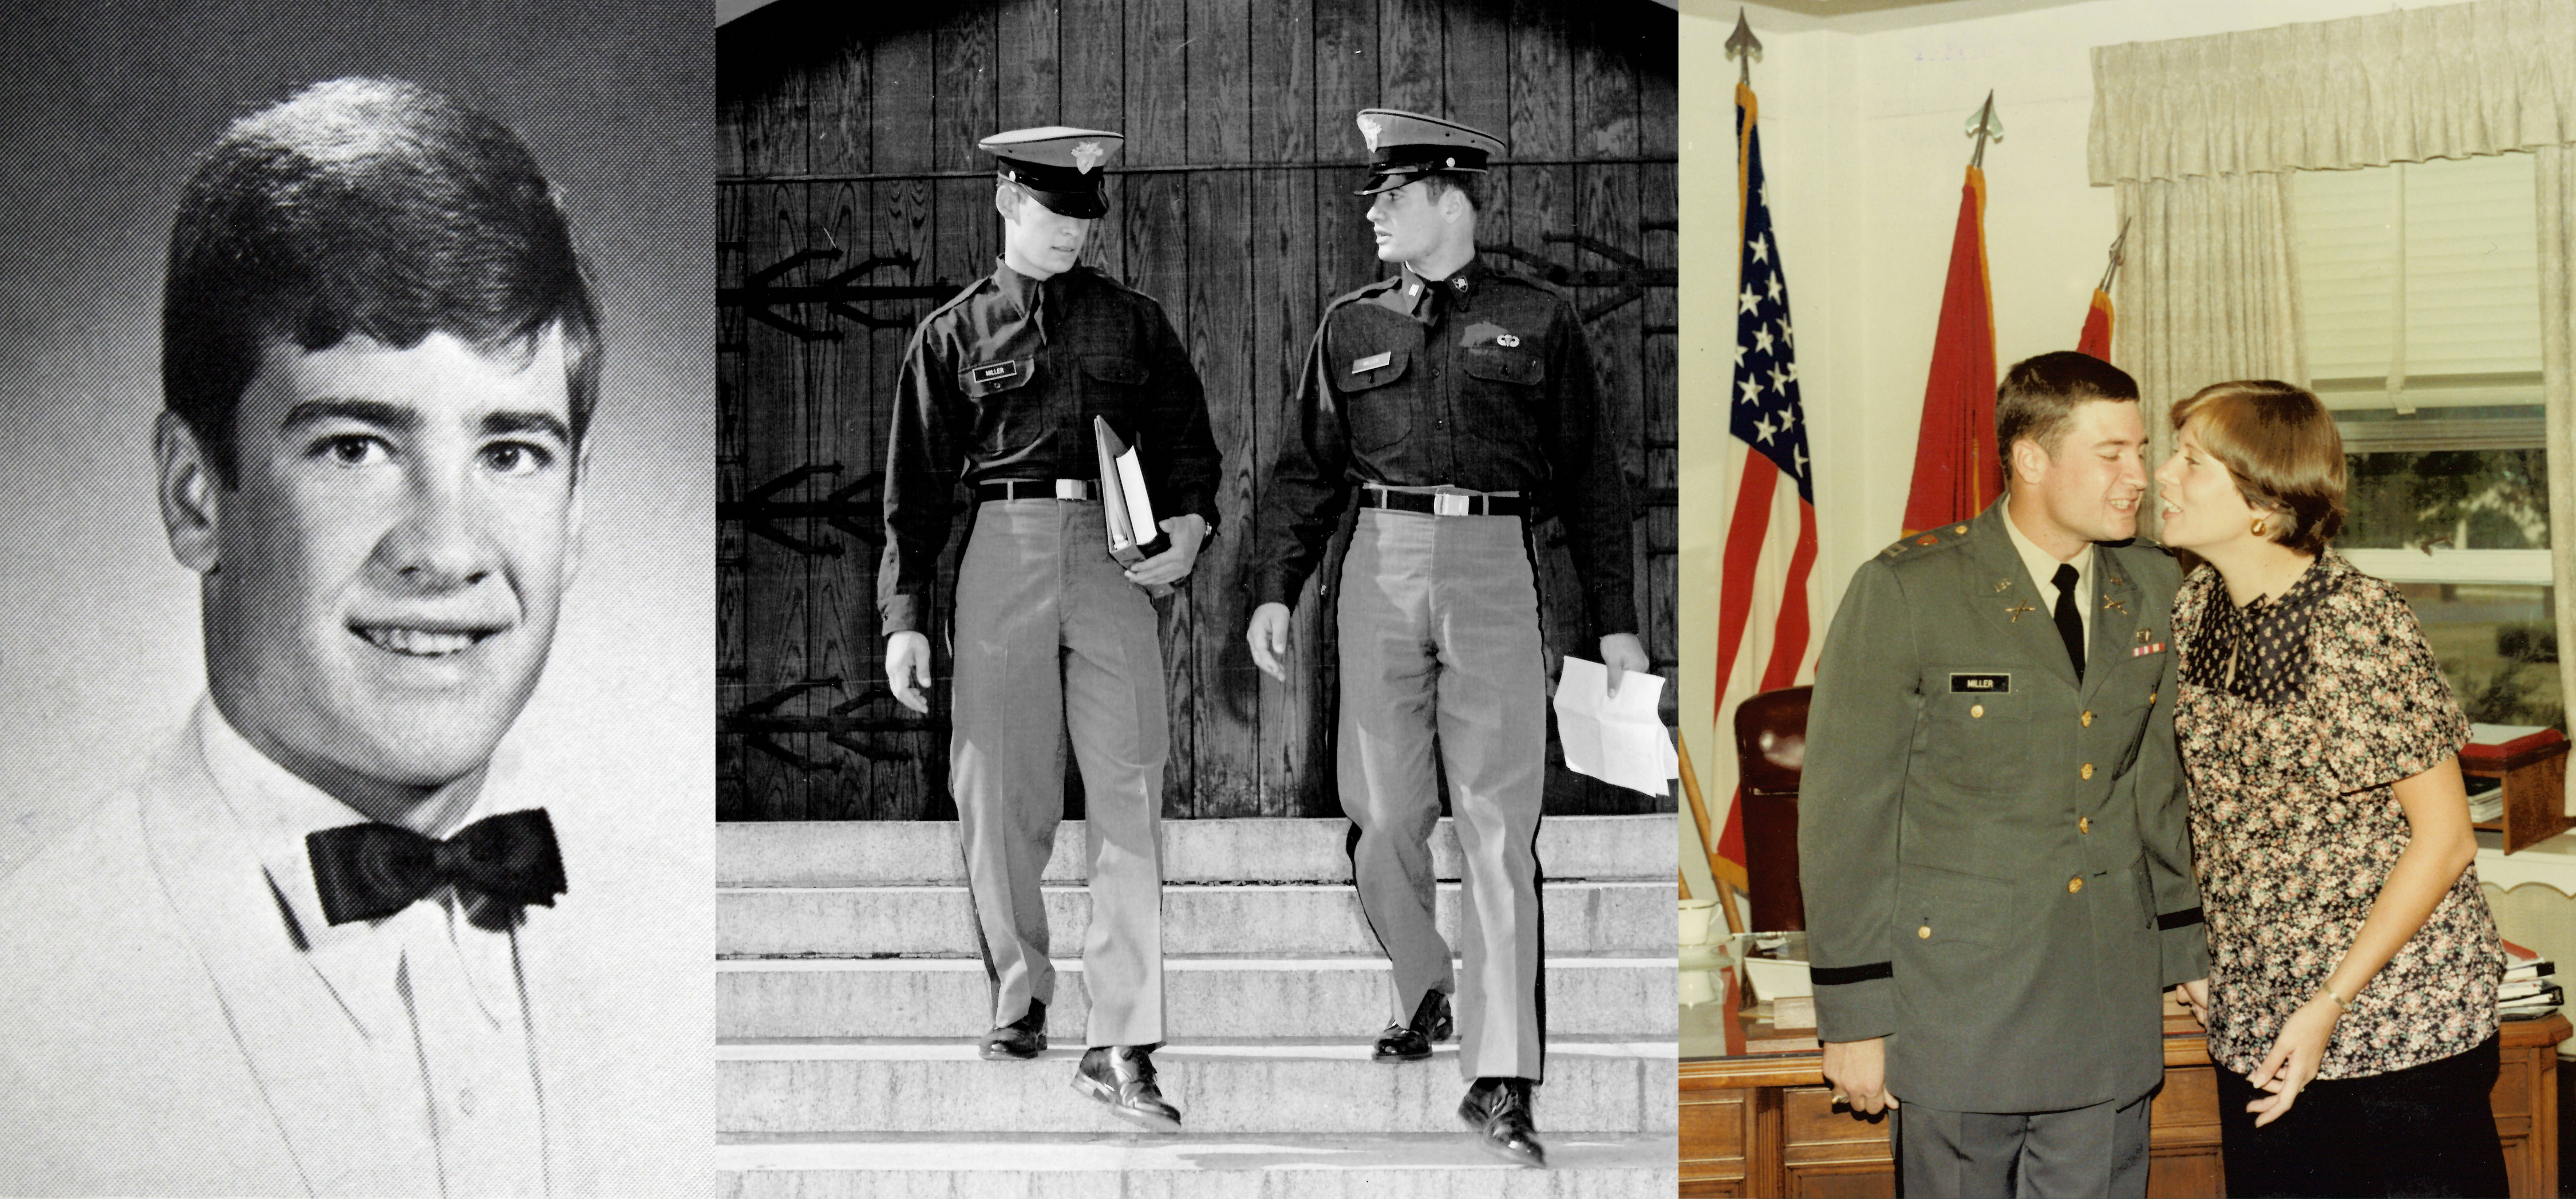 Left: Senior, Center: Gary on right- West Point, with my brother Ken in October 1973. Right:  At Ft. Sill, OK.  My promotion to CPT (Captain) 9-8-1978,  Carol was pregnant with our first son Matthew.